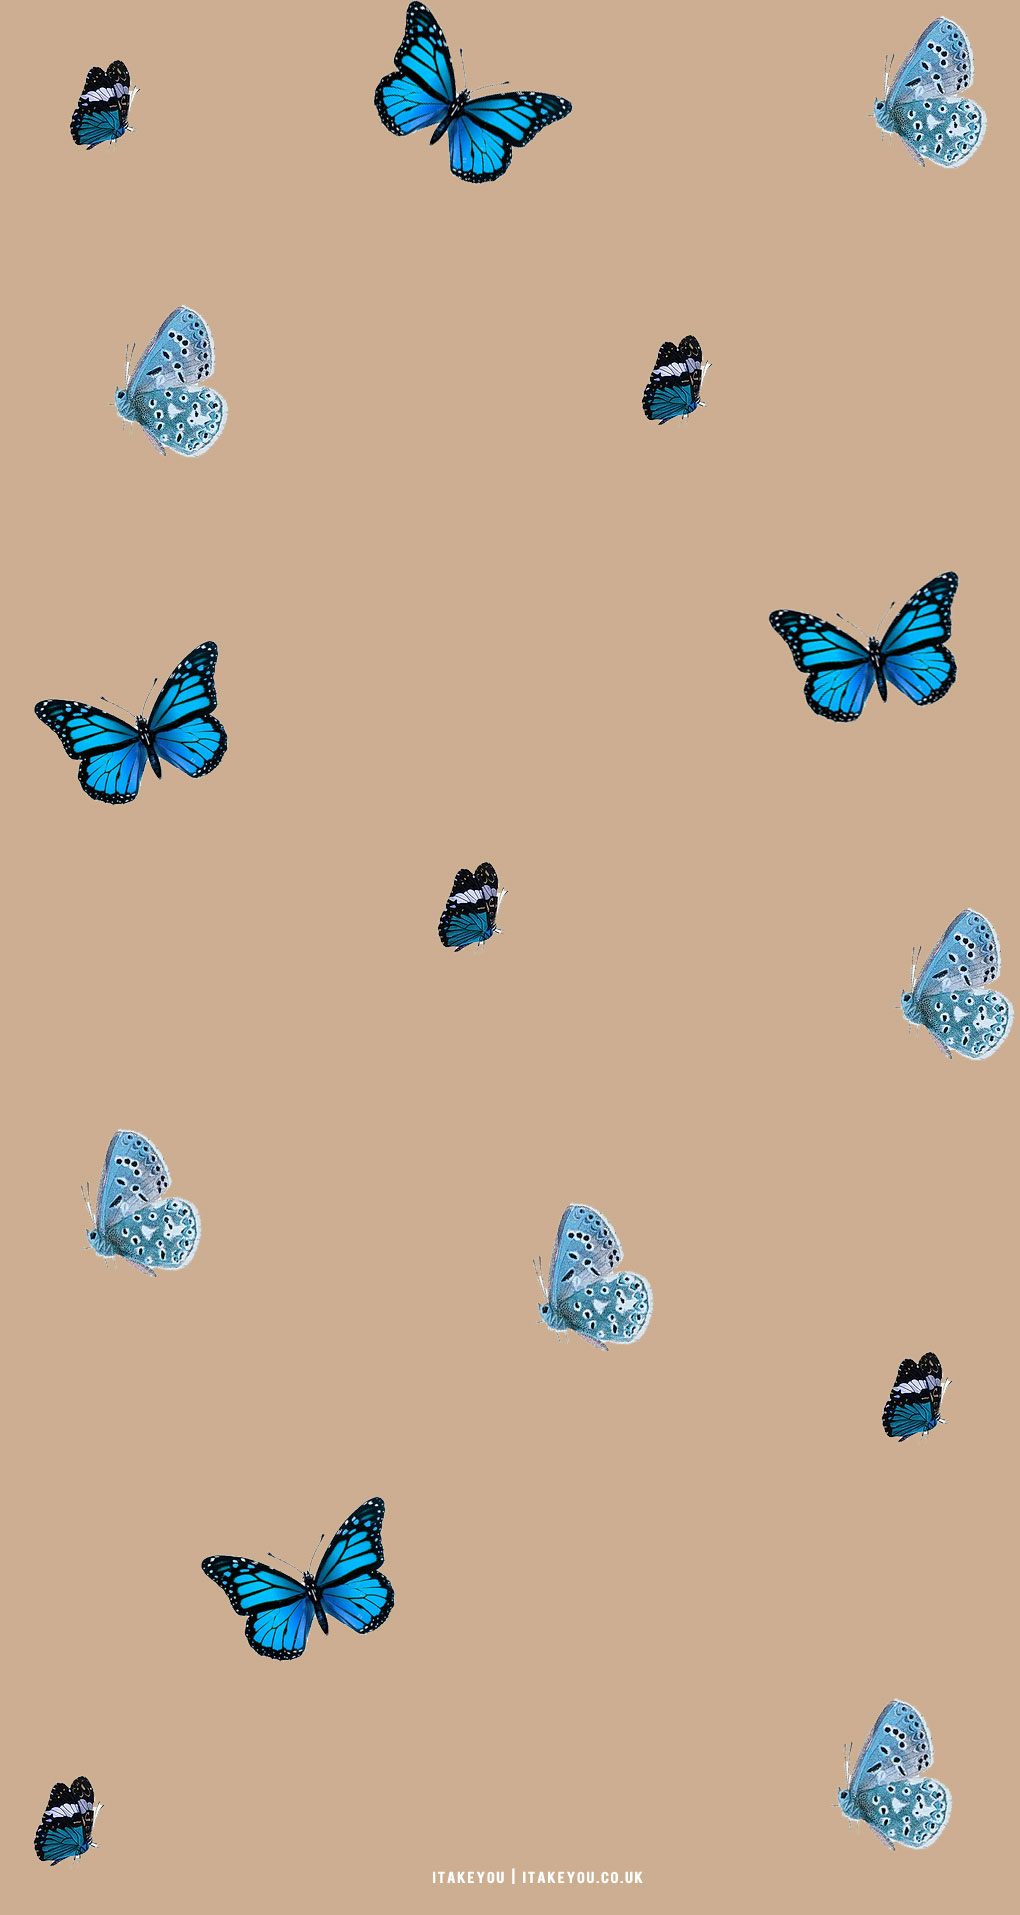 30 Cute Brown Aesthetic Wallpapers for Phone : Butterflies I Take You |  Wedding Readings | Wedding Ideas | Wedding Dresses | Wedding Theme